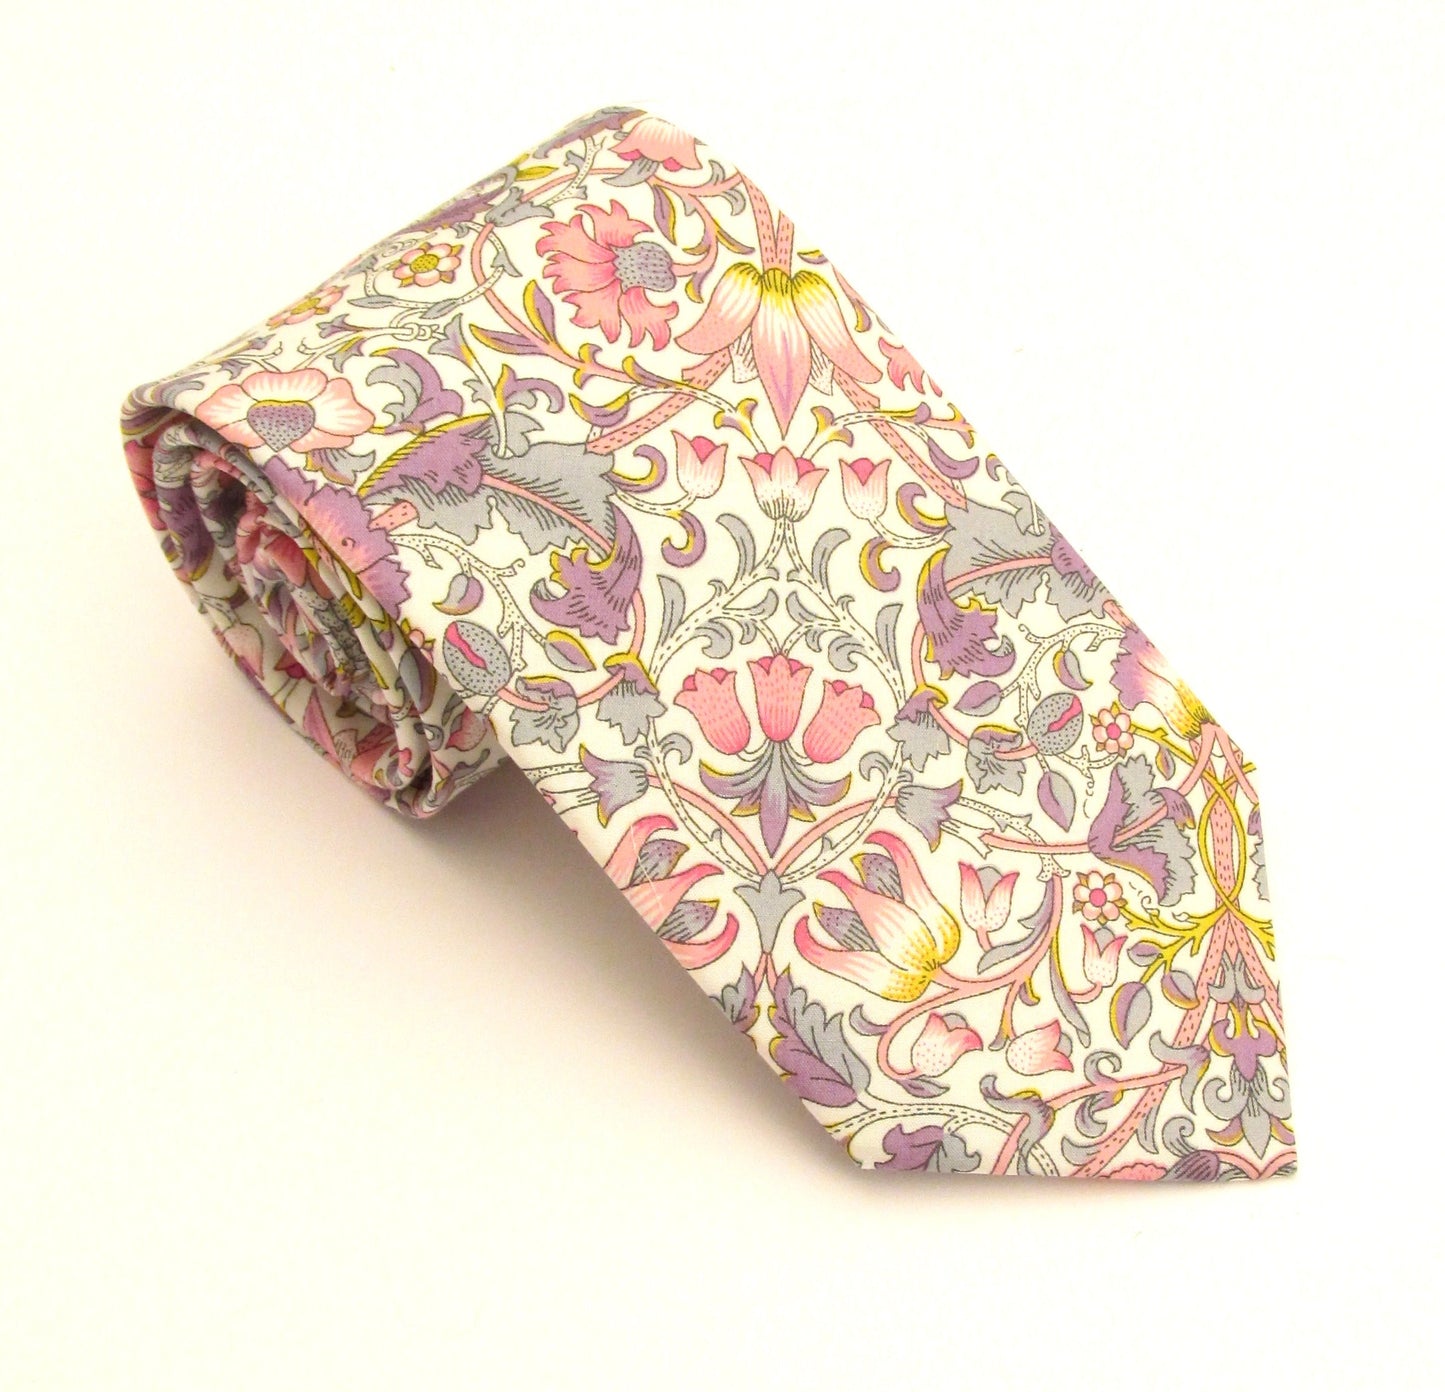 Lodden Pink Cotton Tie Made With Liberty Fabric